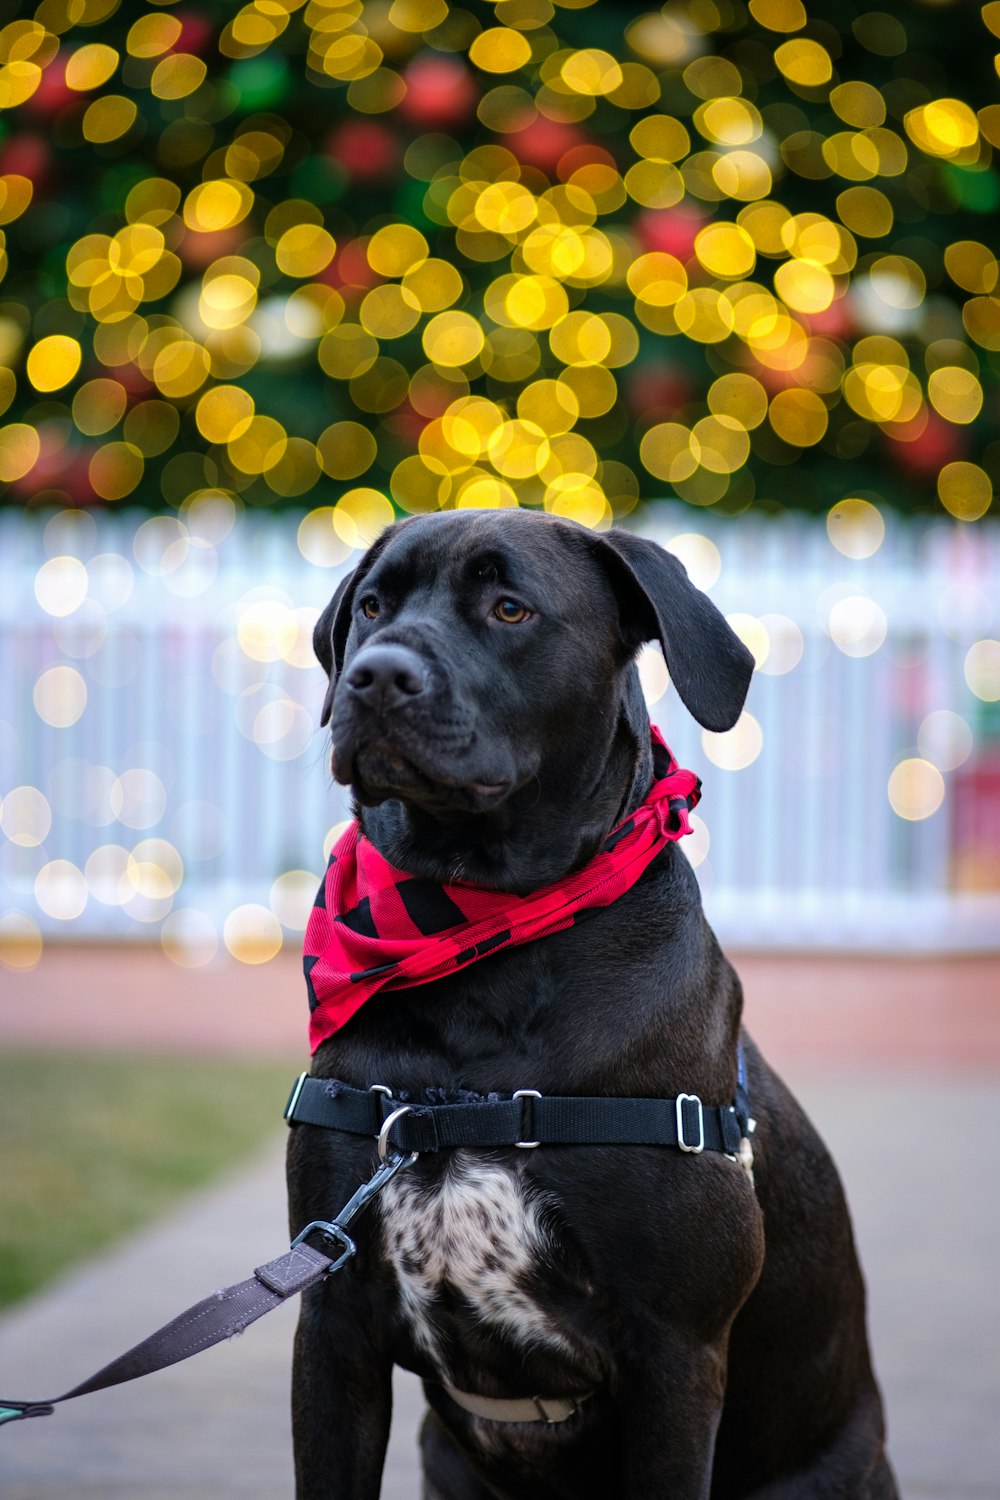 a black dog with a red bandana sitting in front of a christmas tree